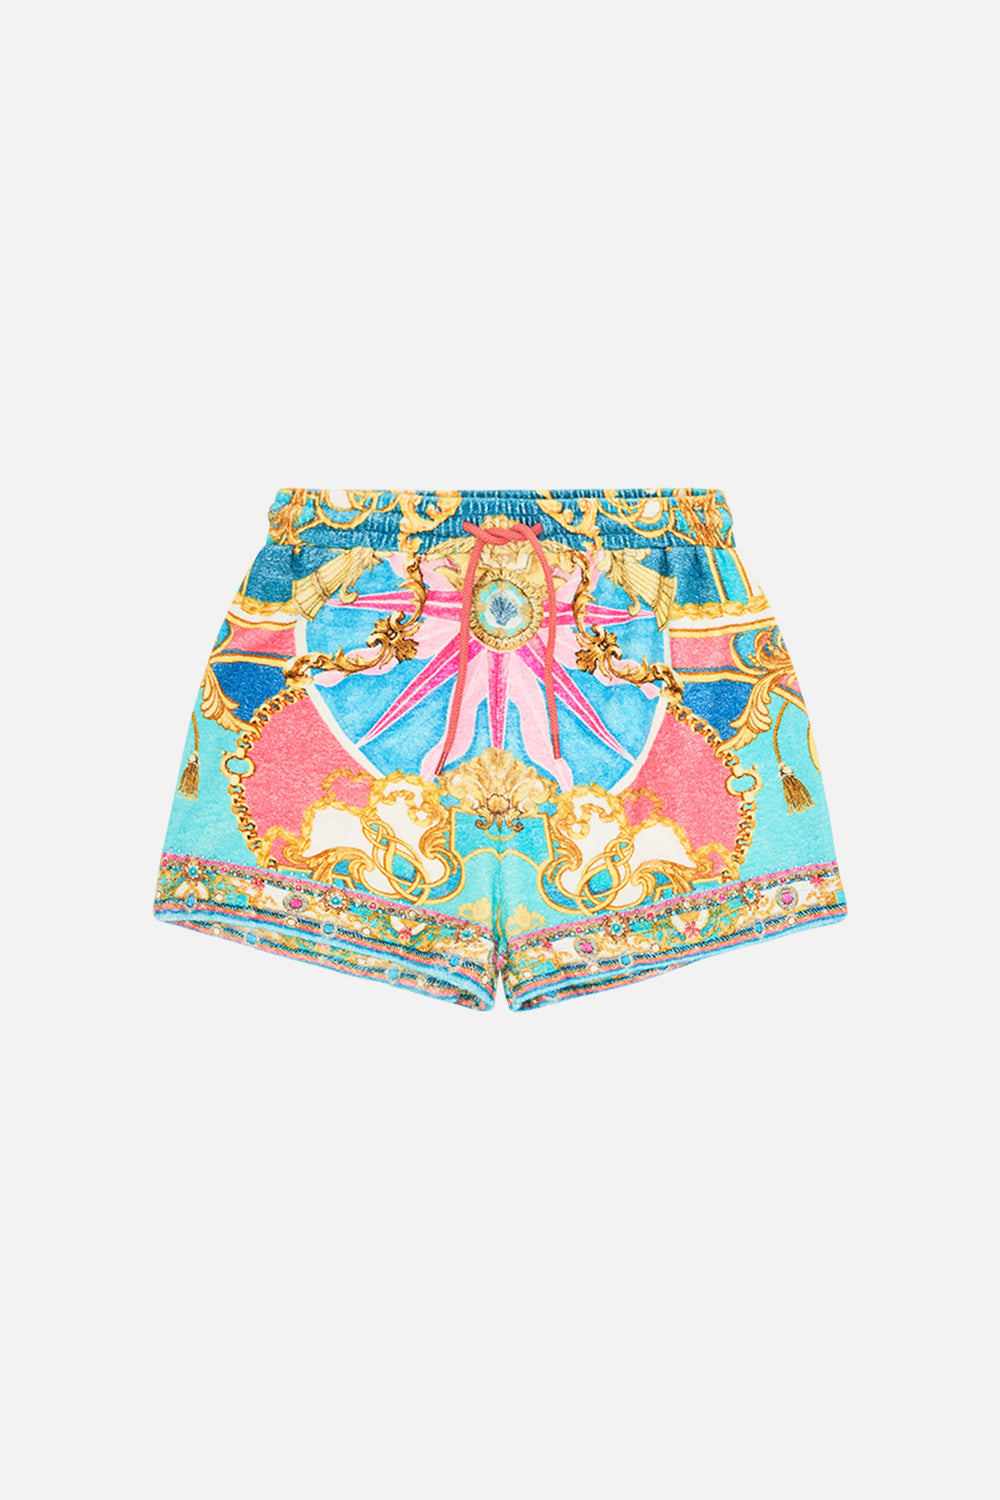 Product view of Milla By CAMILLA kids terry shorts in Sail Away With Me print